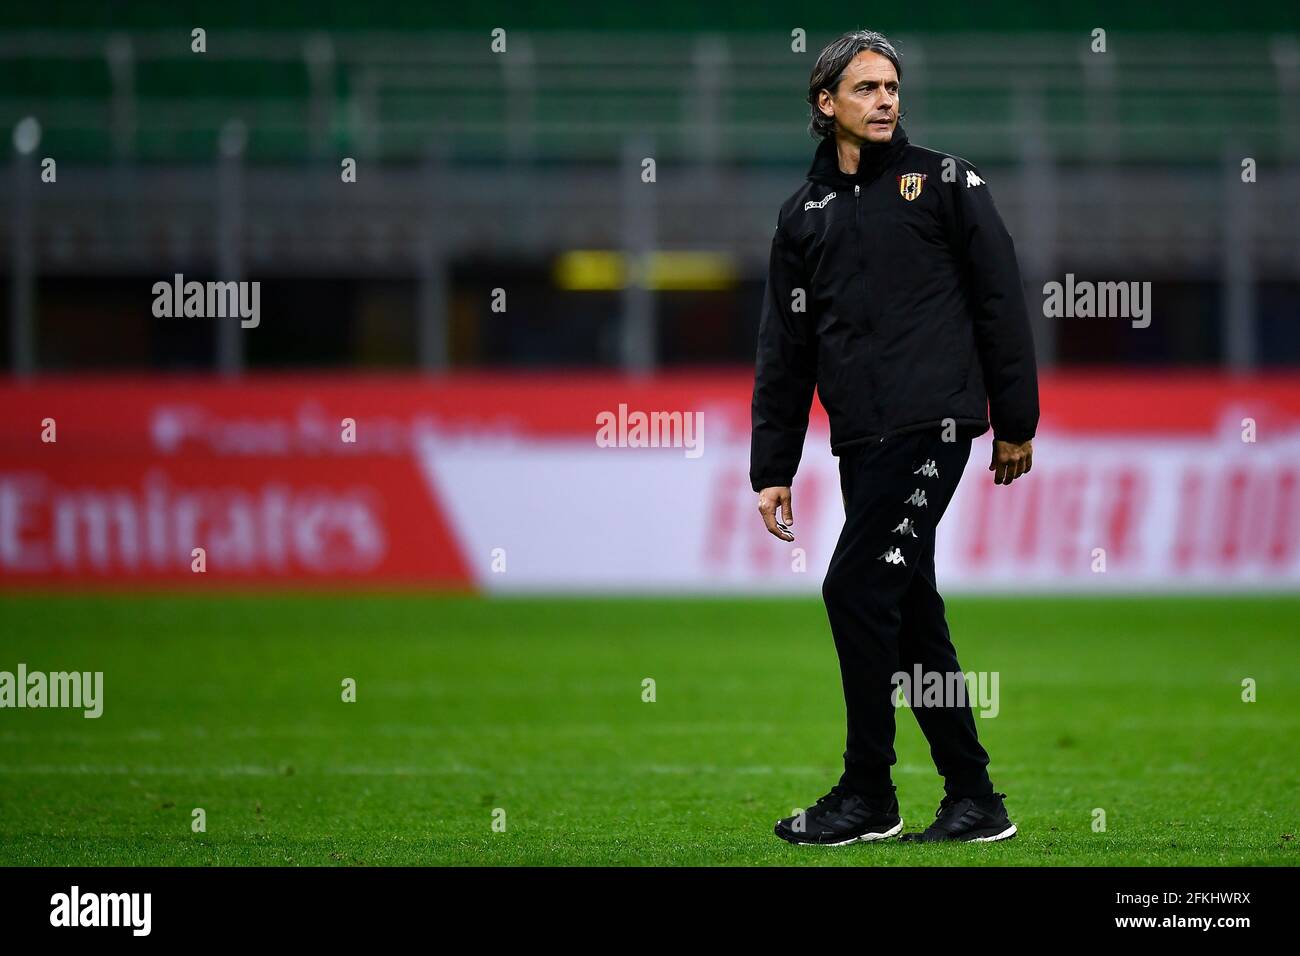 Milan, Italy. 01 May 2021. Filippo Inzaghi, head coach of Benevento Calcio,  looks on at the end of the Serie A football match between AC Milan and  Benevento Calcio. AC Milan won